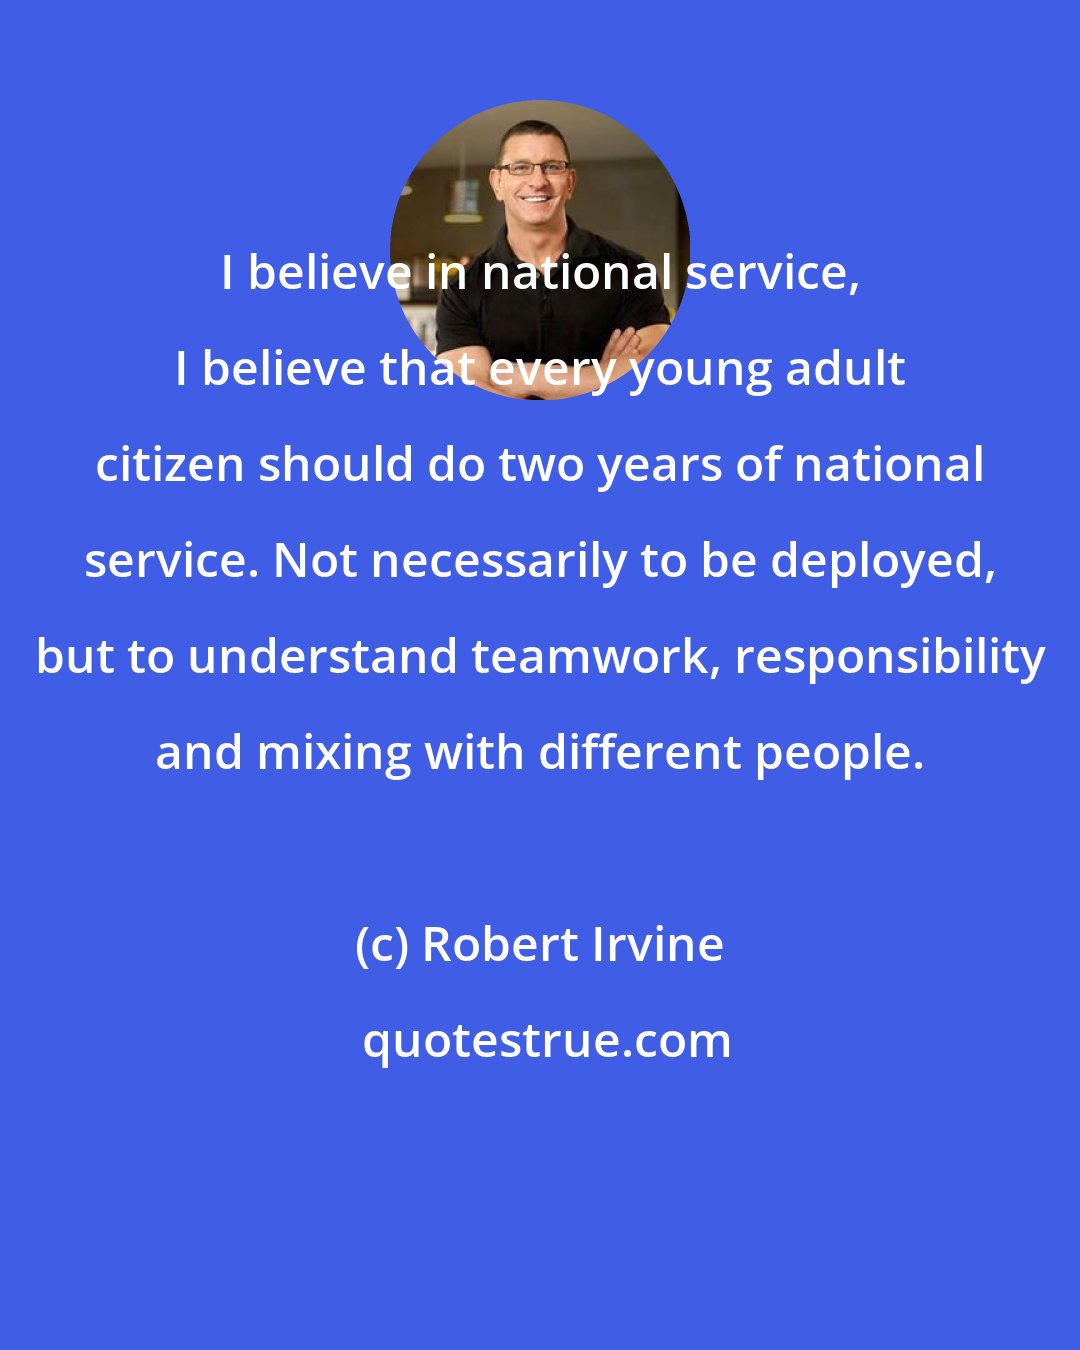 Robert Irvine: I believe in national service, I believe that every young adult citizen should do two years of national service. Not necessarily to be deployed, but to understand teamwork, responsibility and mixing with different people.